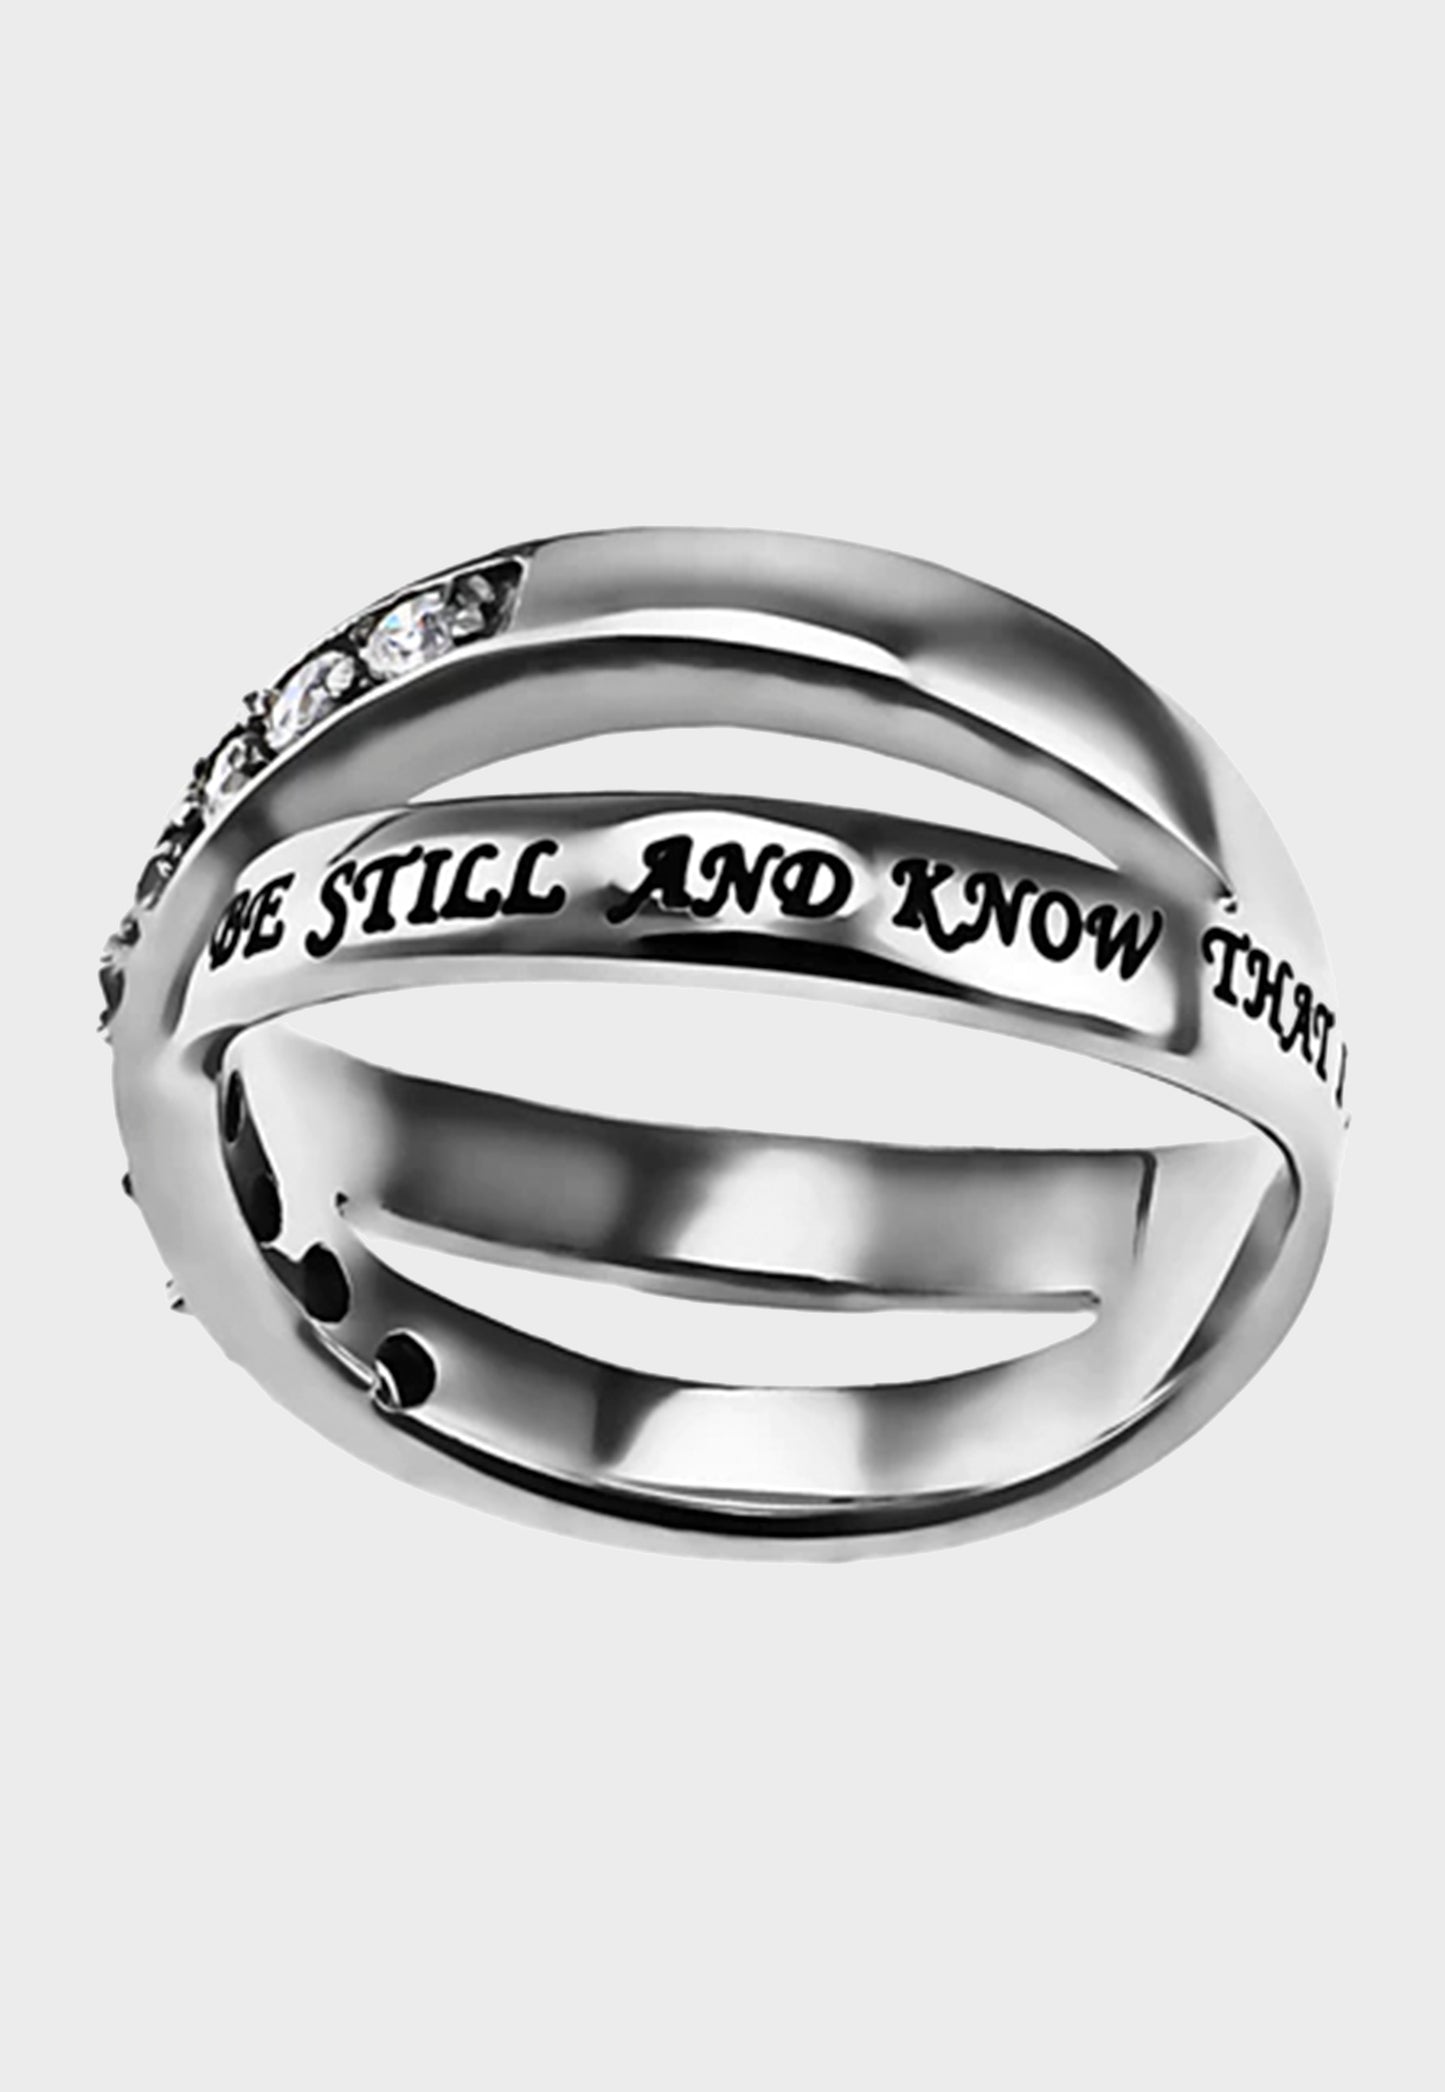 Radiance jewelry for women with Christian inscription